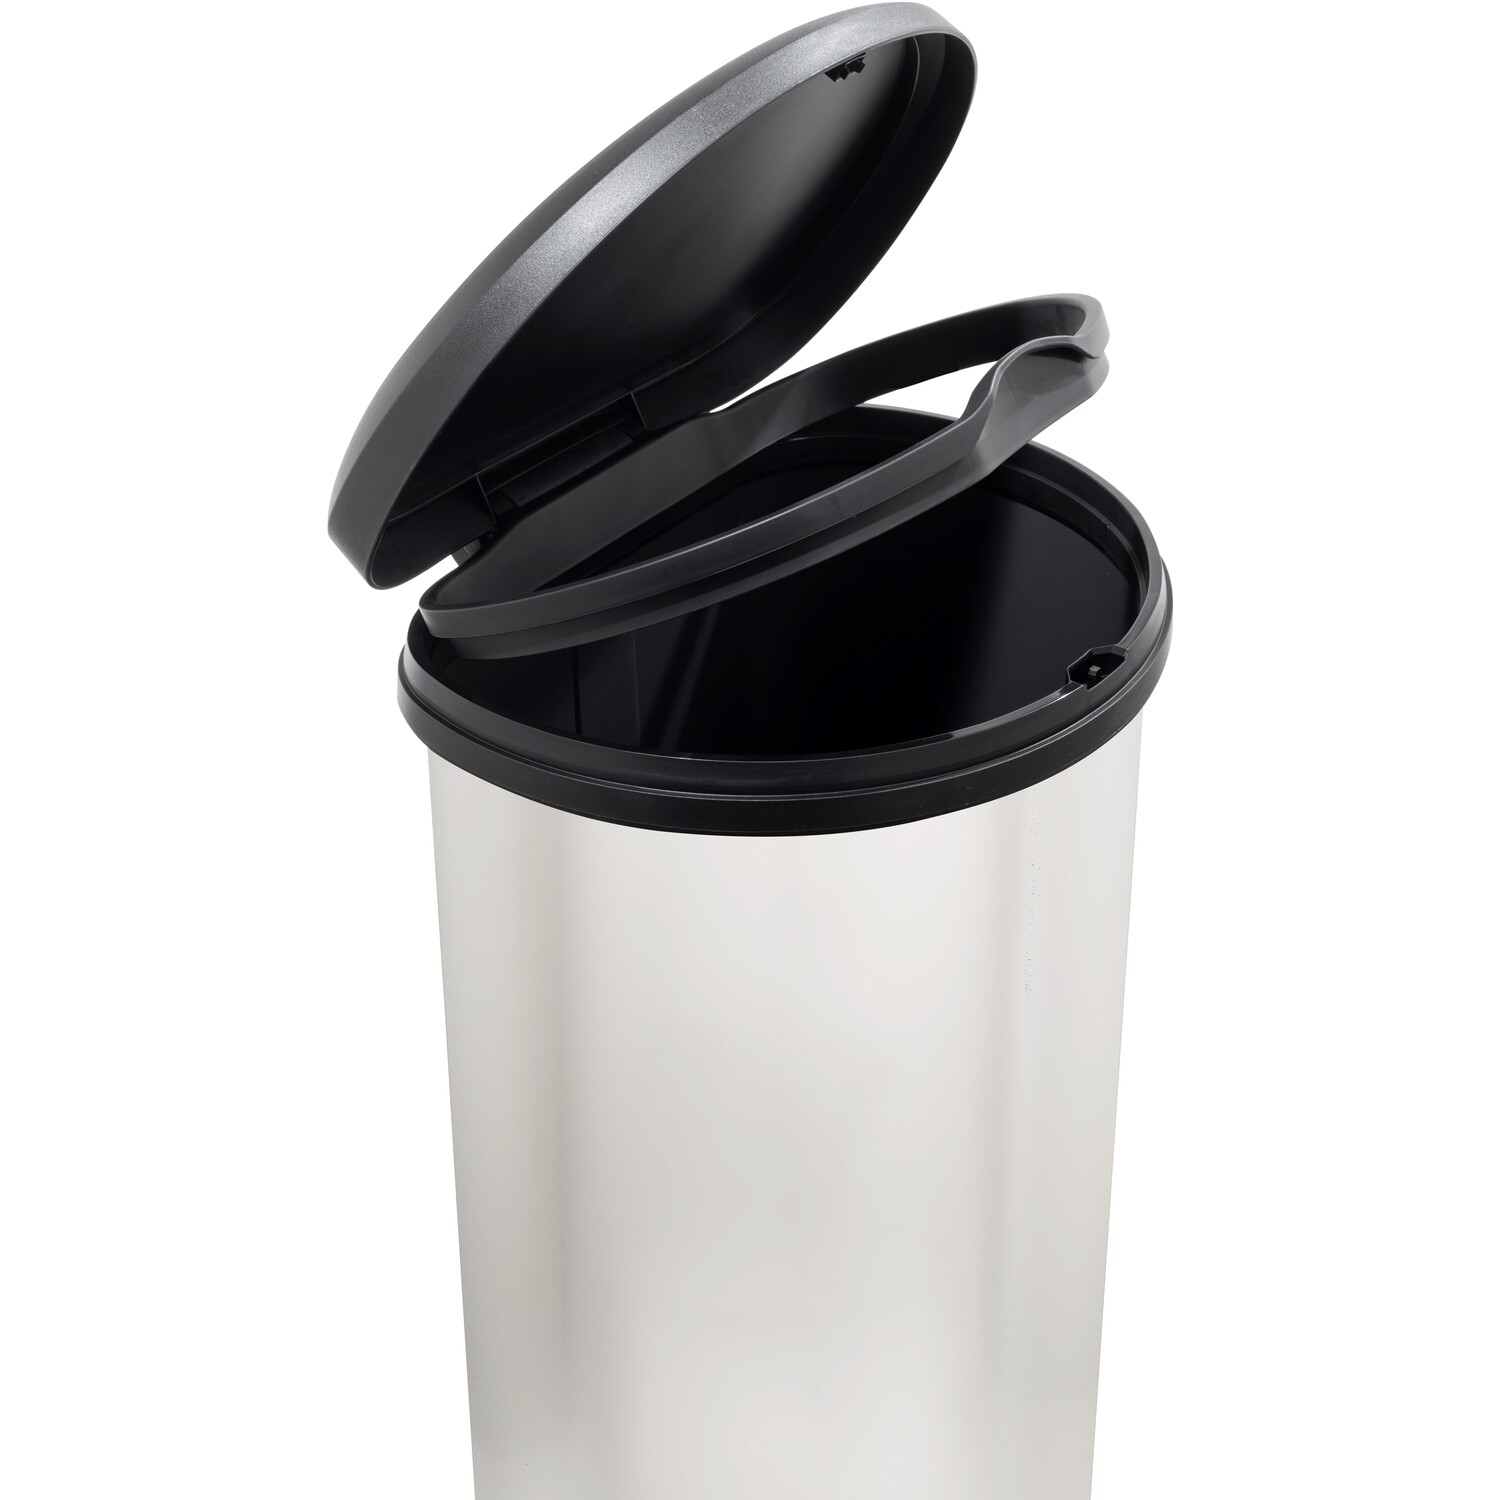 Curver Silver Deco Recycled Bin 40L Image 3